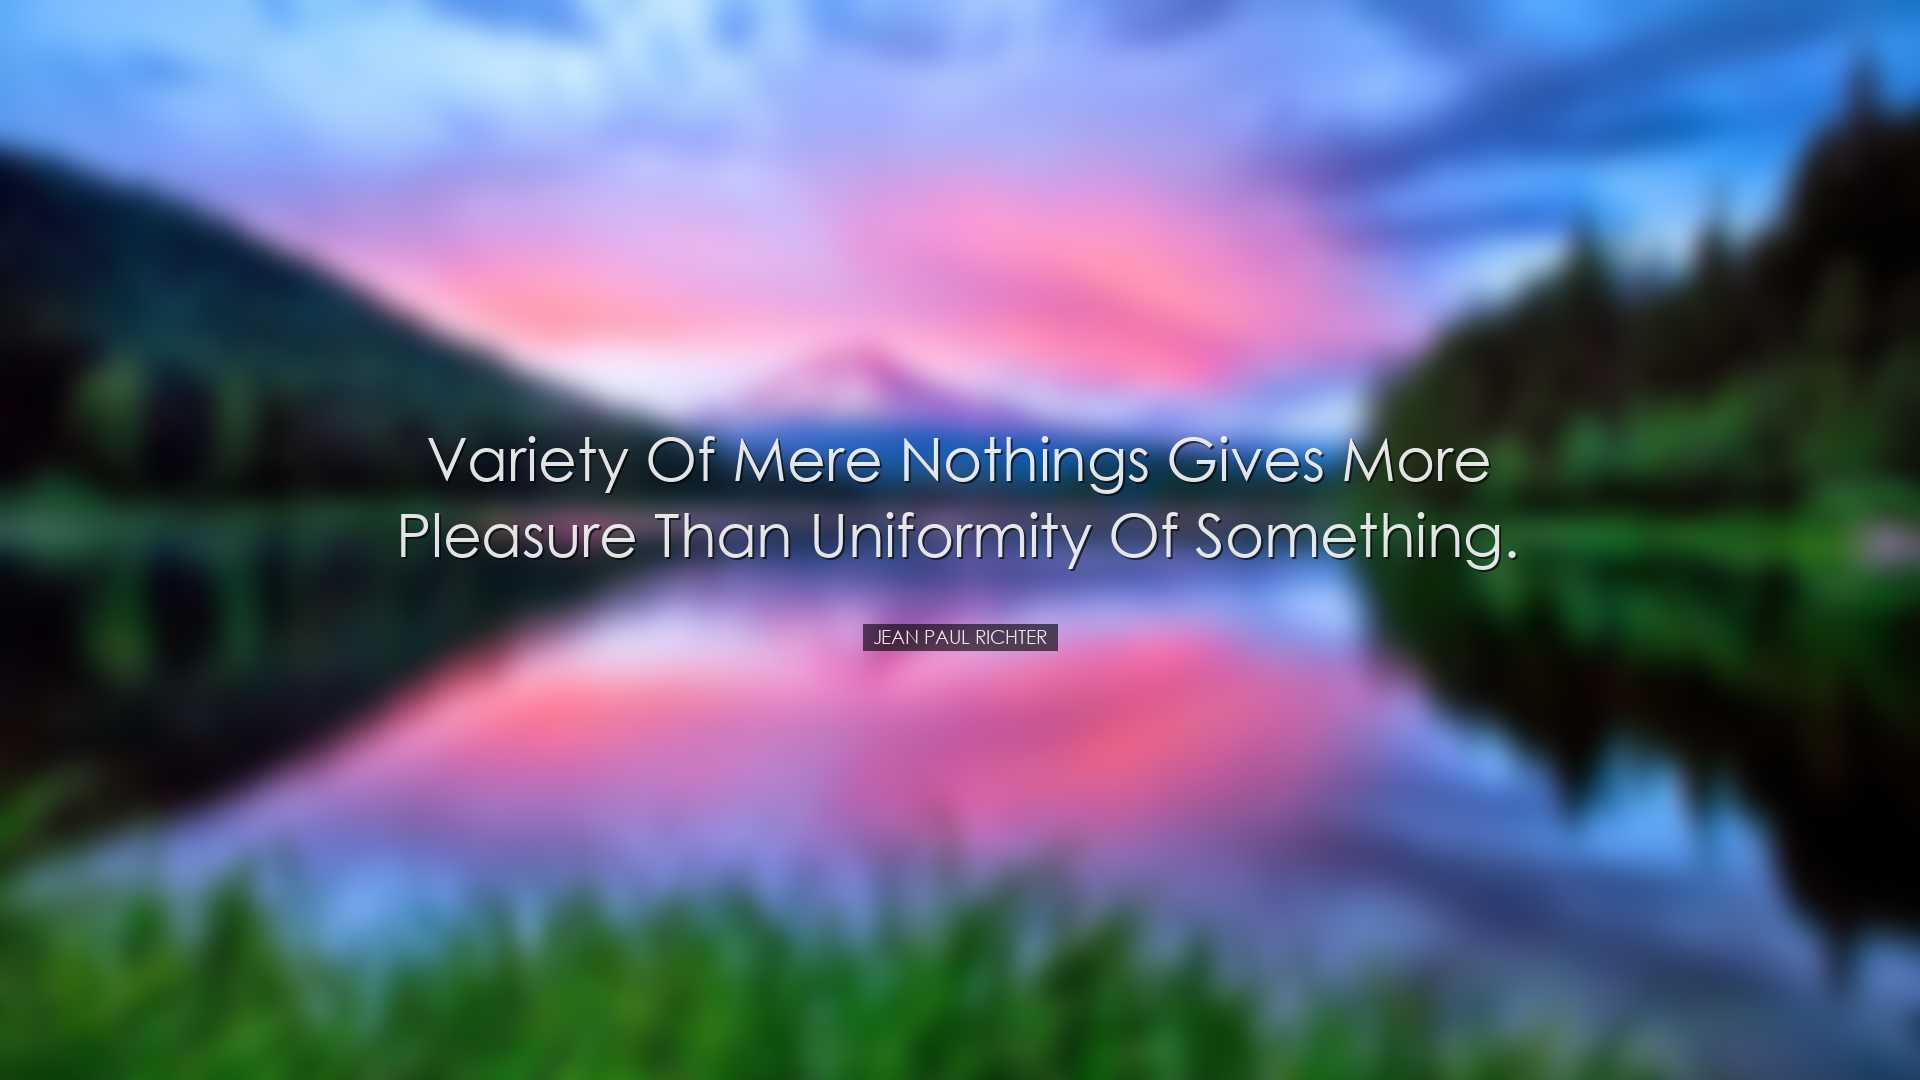 Variety of mere nothings gives more pleasure than uniformity of so